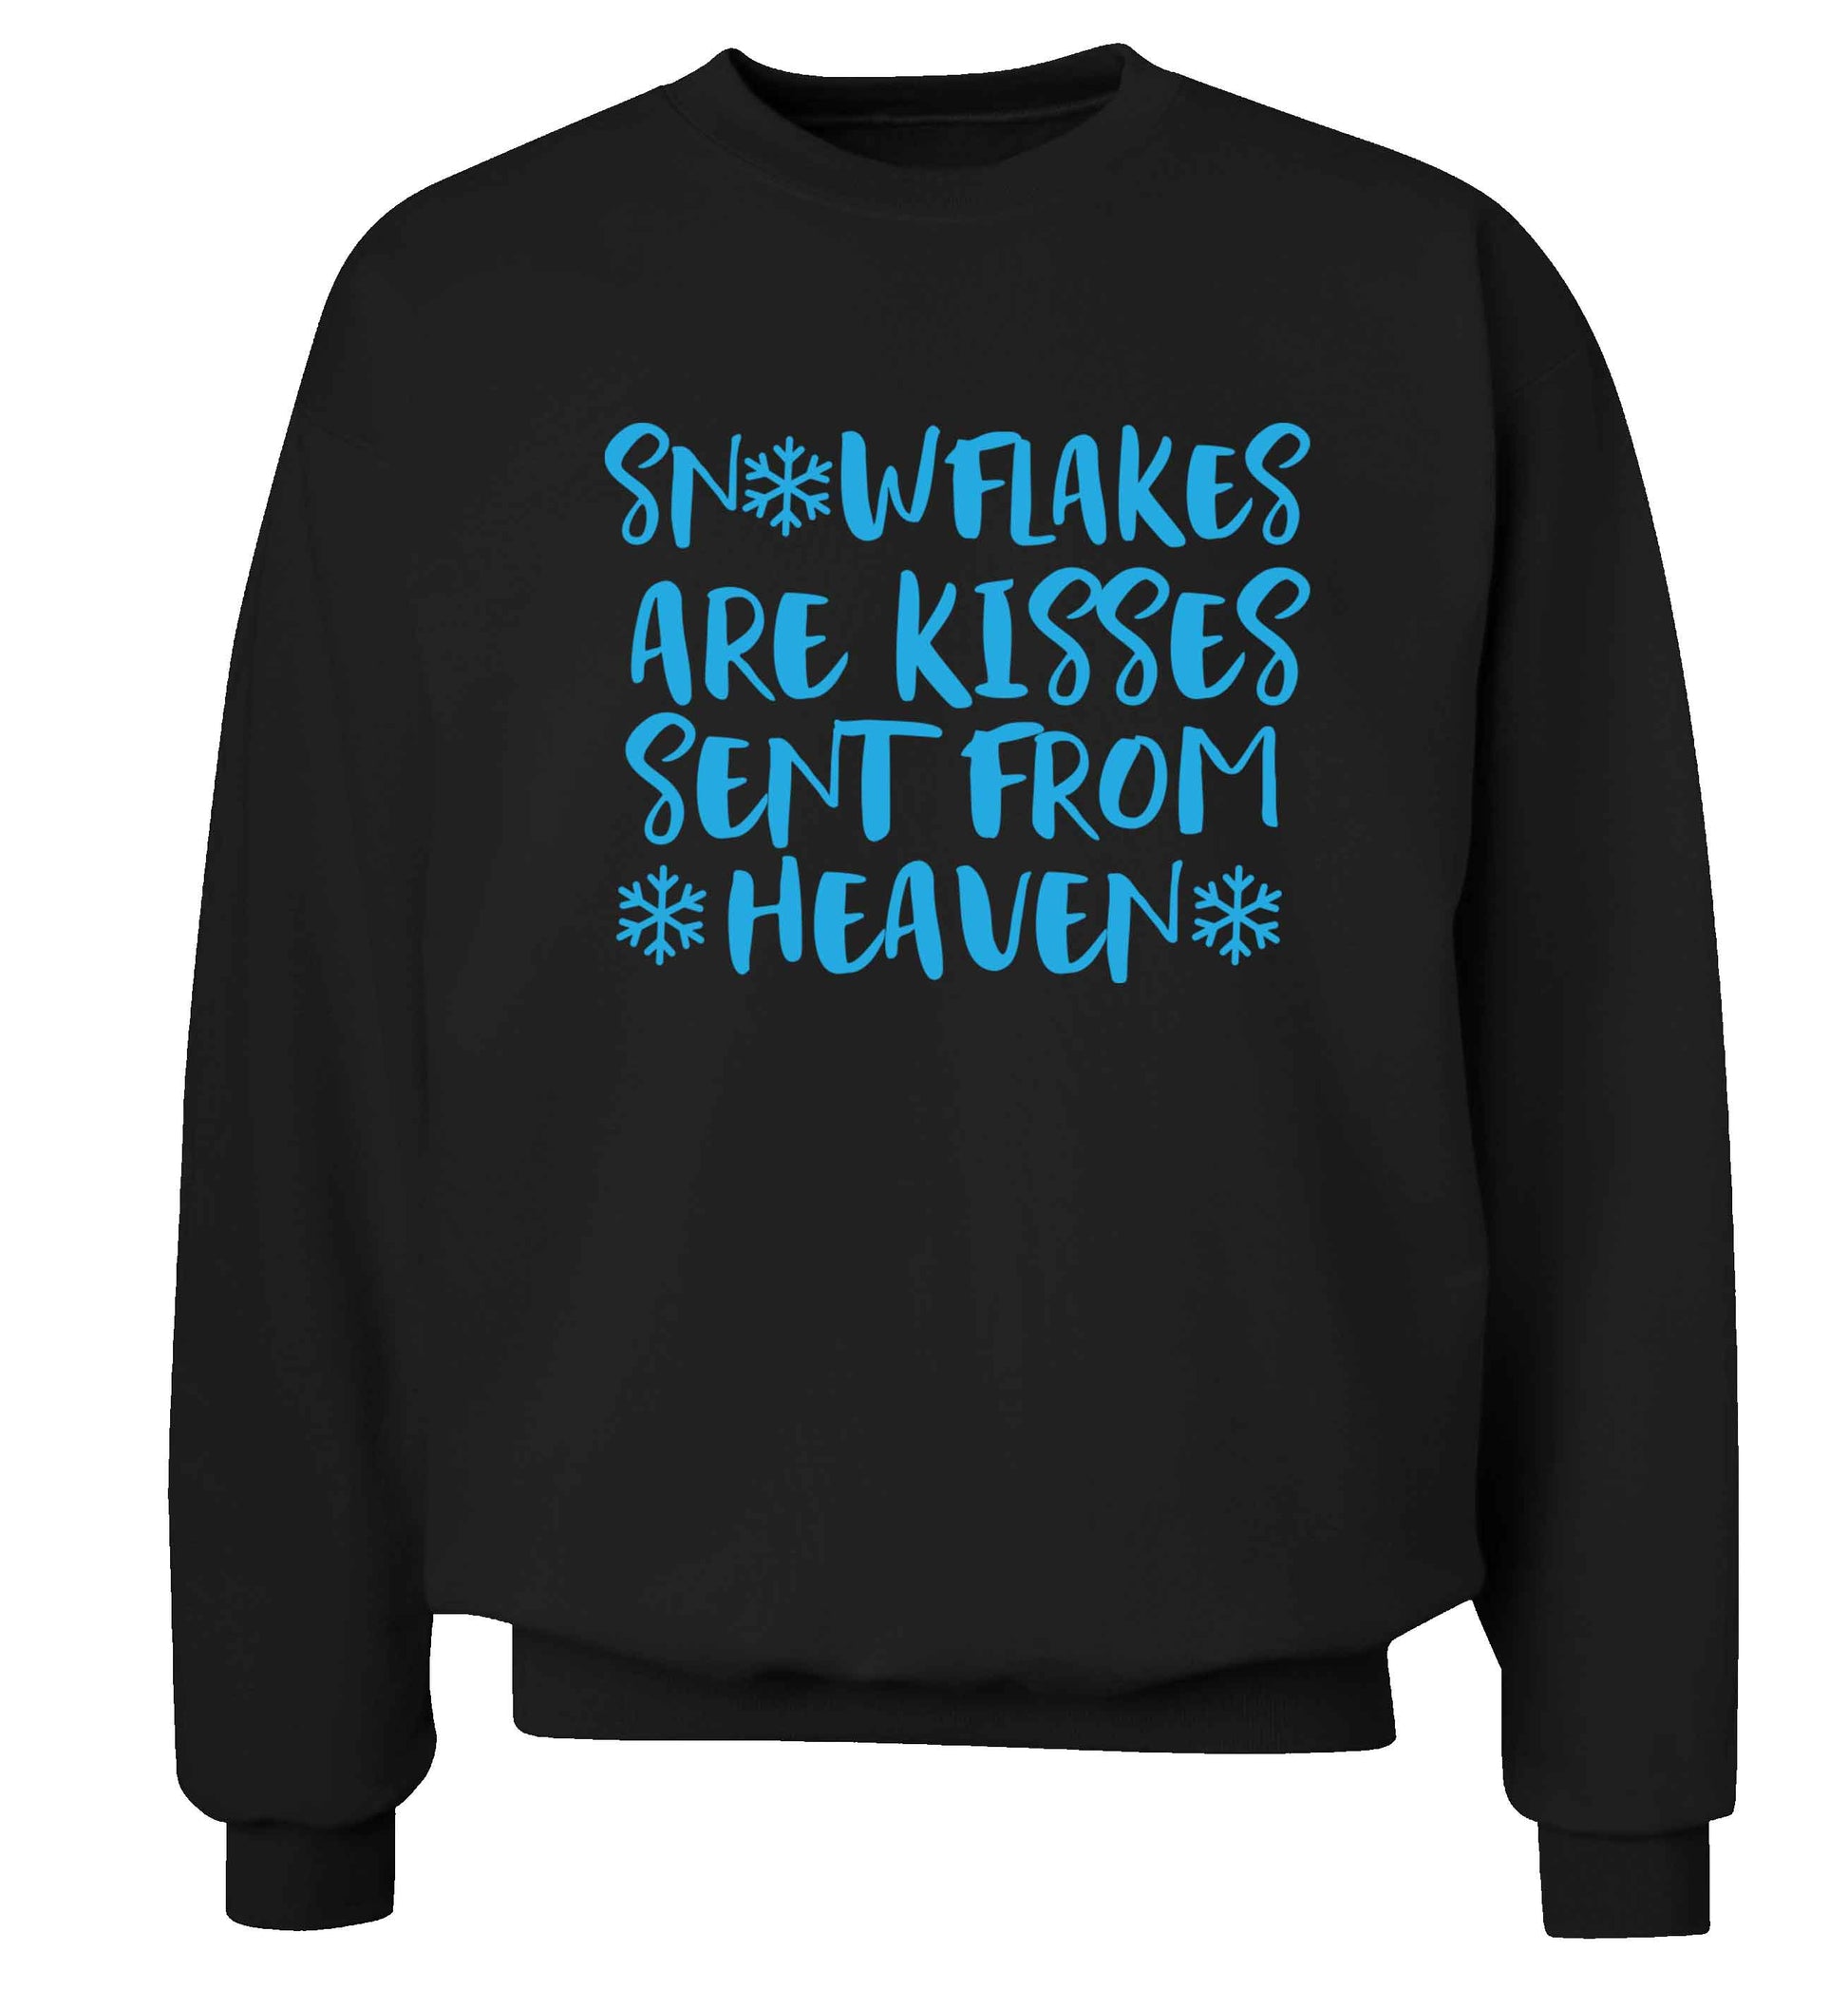 Snowflakes are kisses sent from heaven Adult's unisex black Sweater 2XL